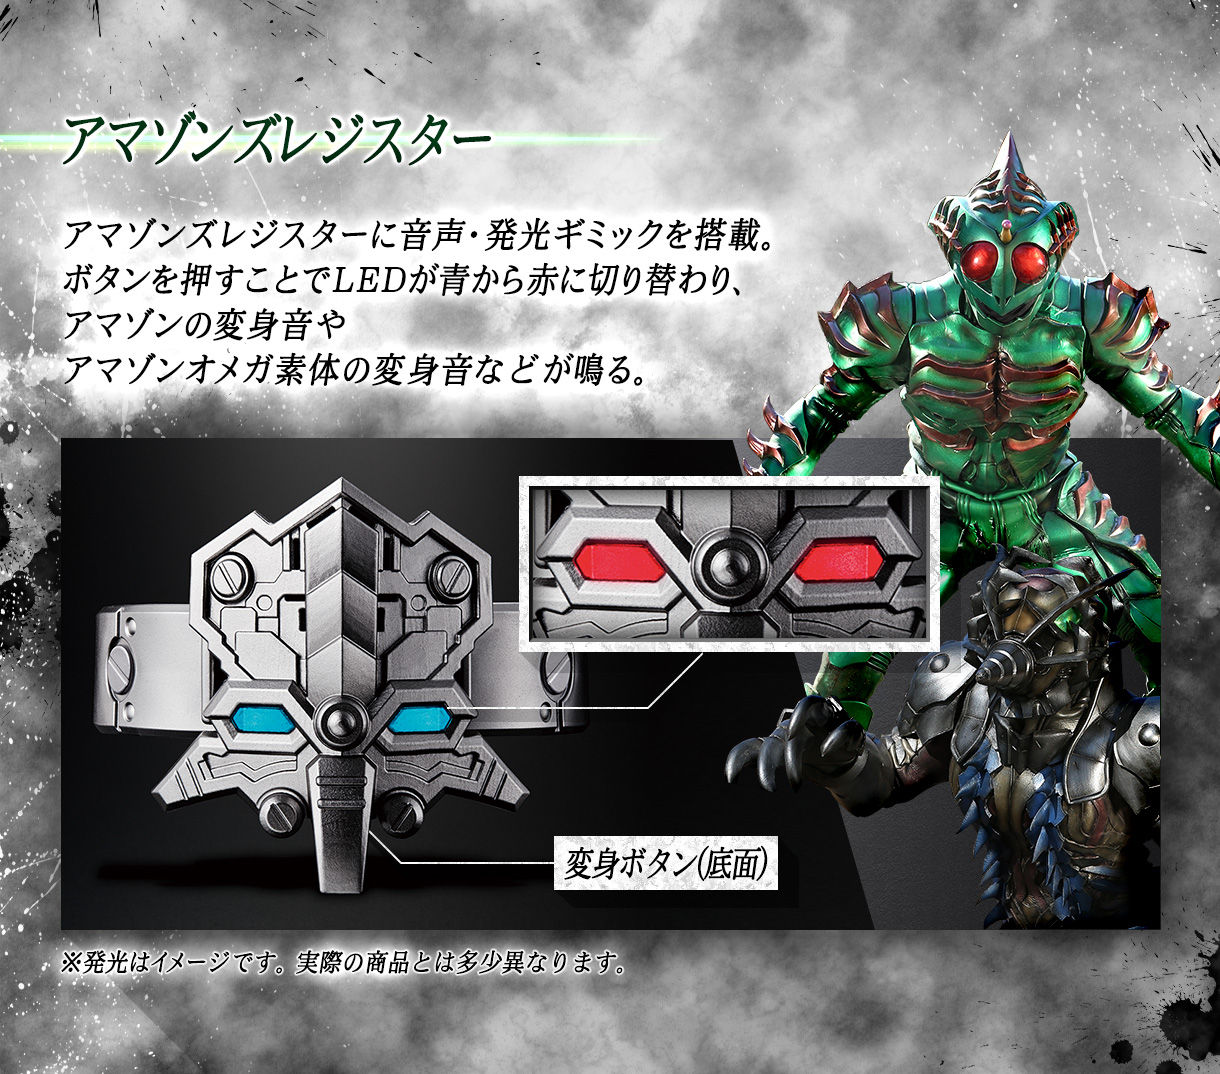 Complete Selection Modification アマゾンズドライバー Csmアマゾンズドライバー 仮面ライダーアマゾンズ 趣味 コレクション バンダイナムコグループ公式通販サイト